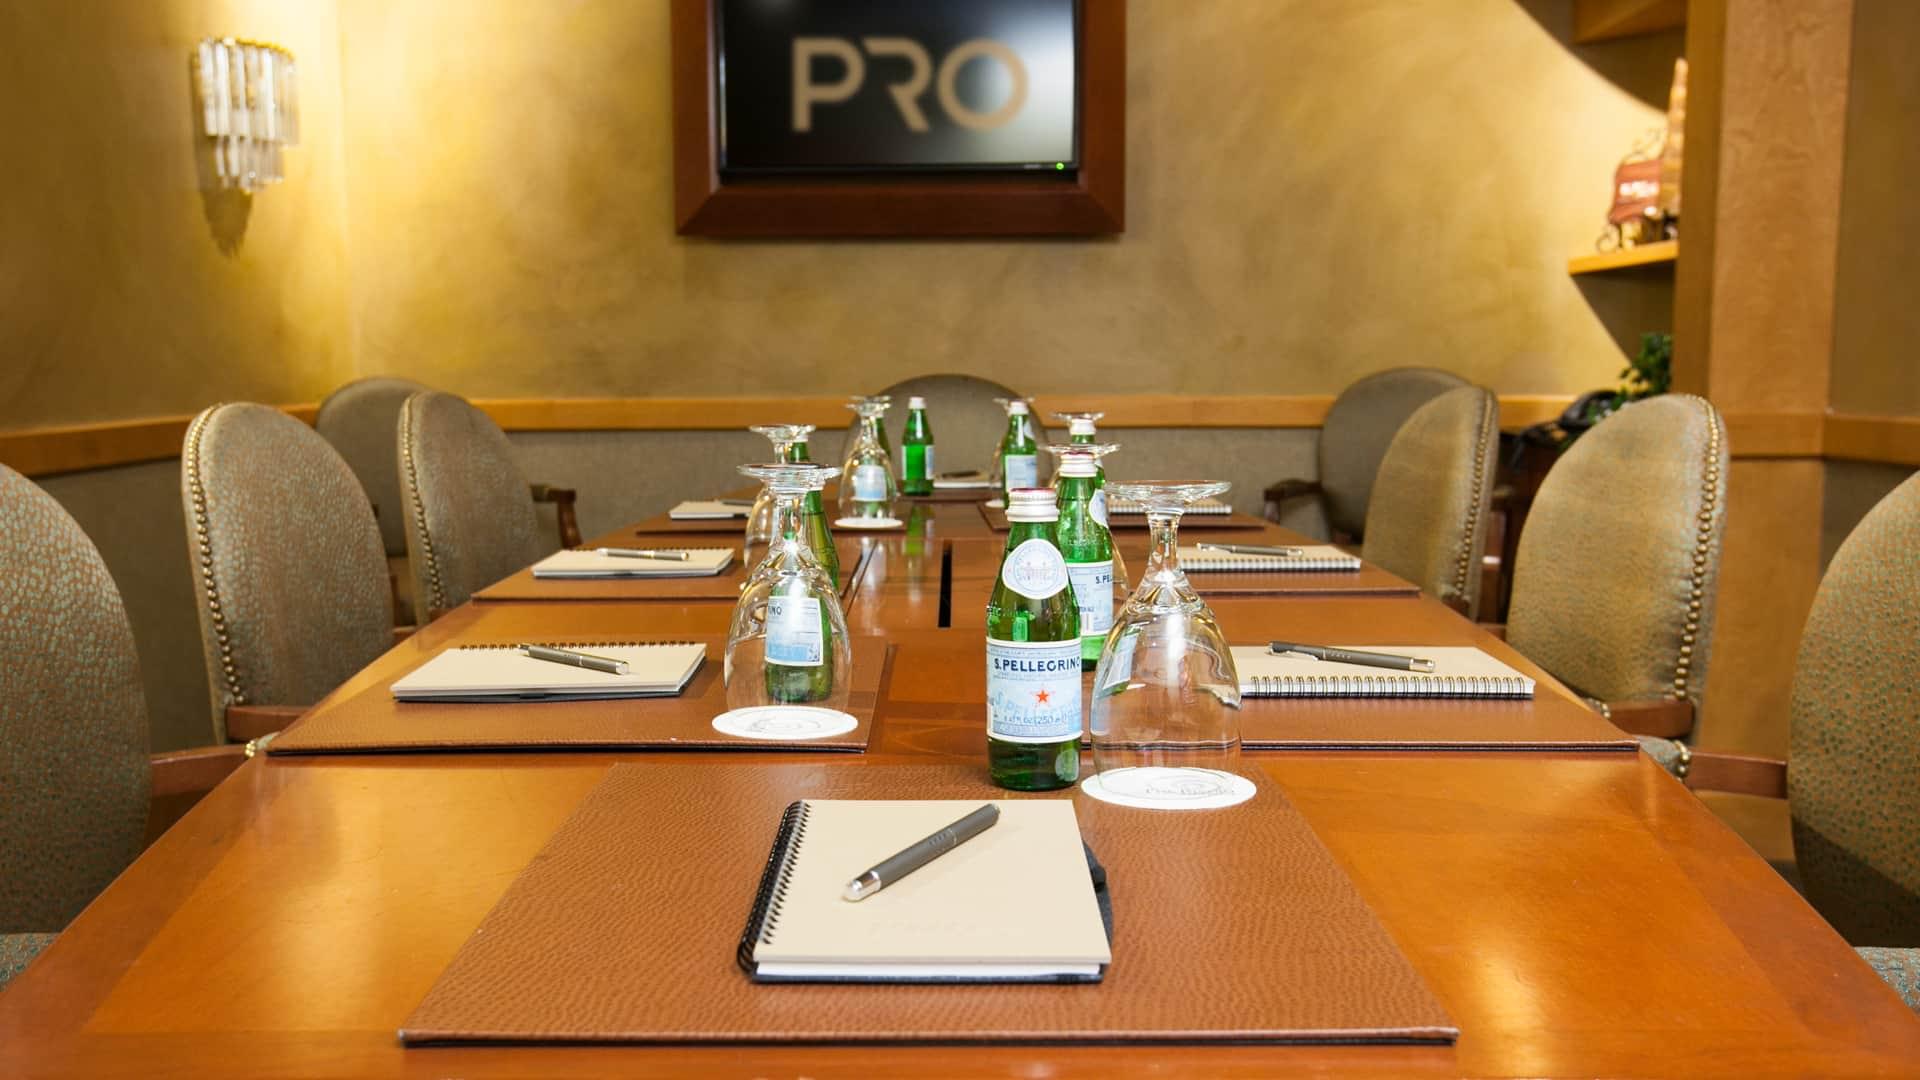 A private event being hosted in the AllStar Room at PRO Club - Bellevue